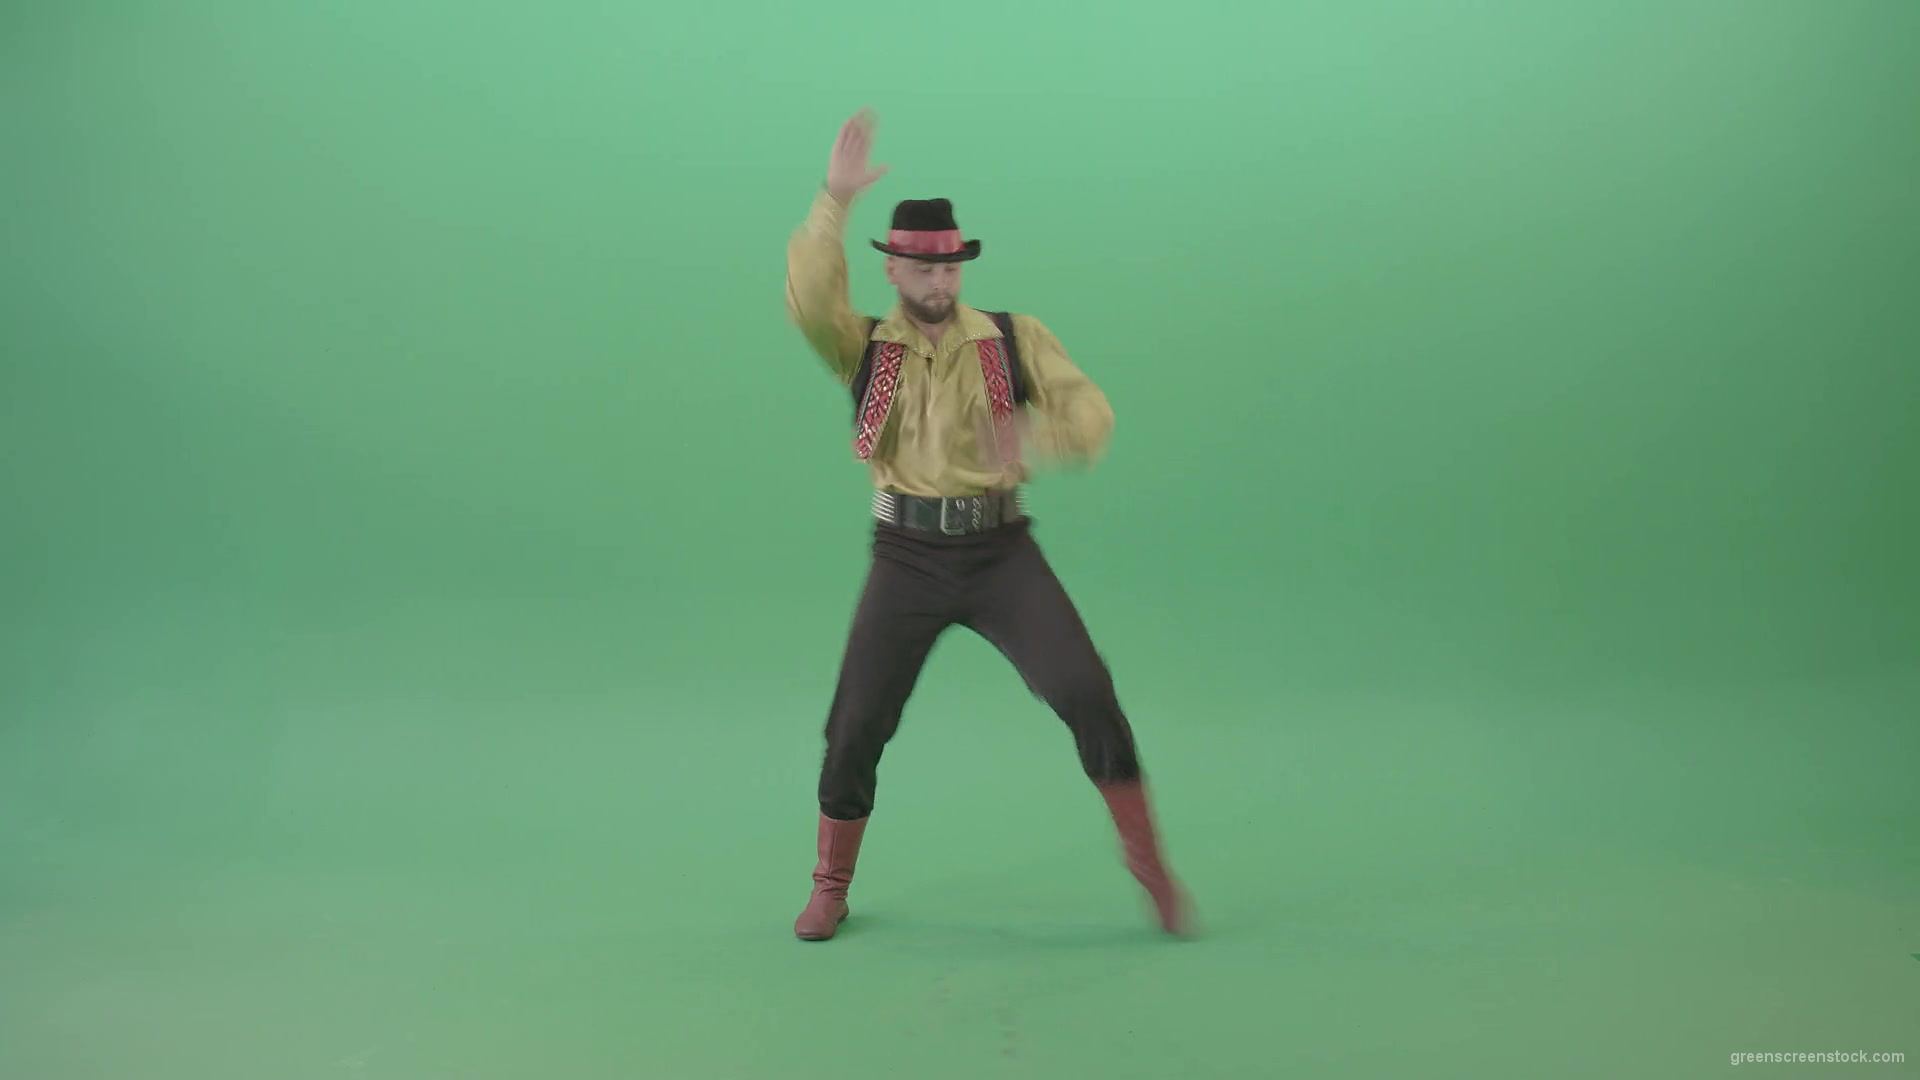 Moldova-man-dancing-with-clapping-isolated-on-Green-Screen-4K-Video-Footage-1920_007 Green Screen Stock